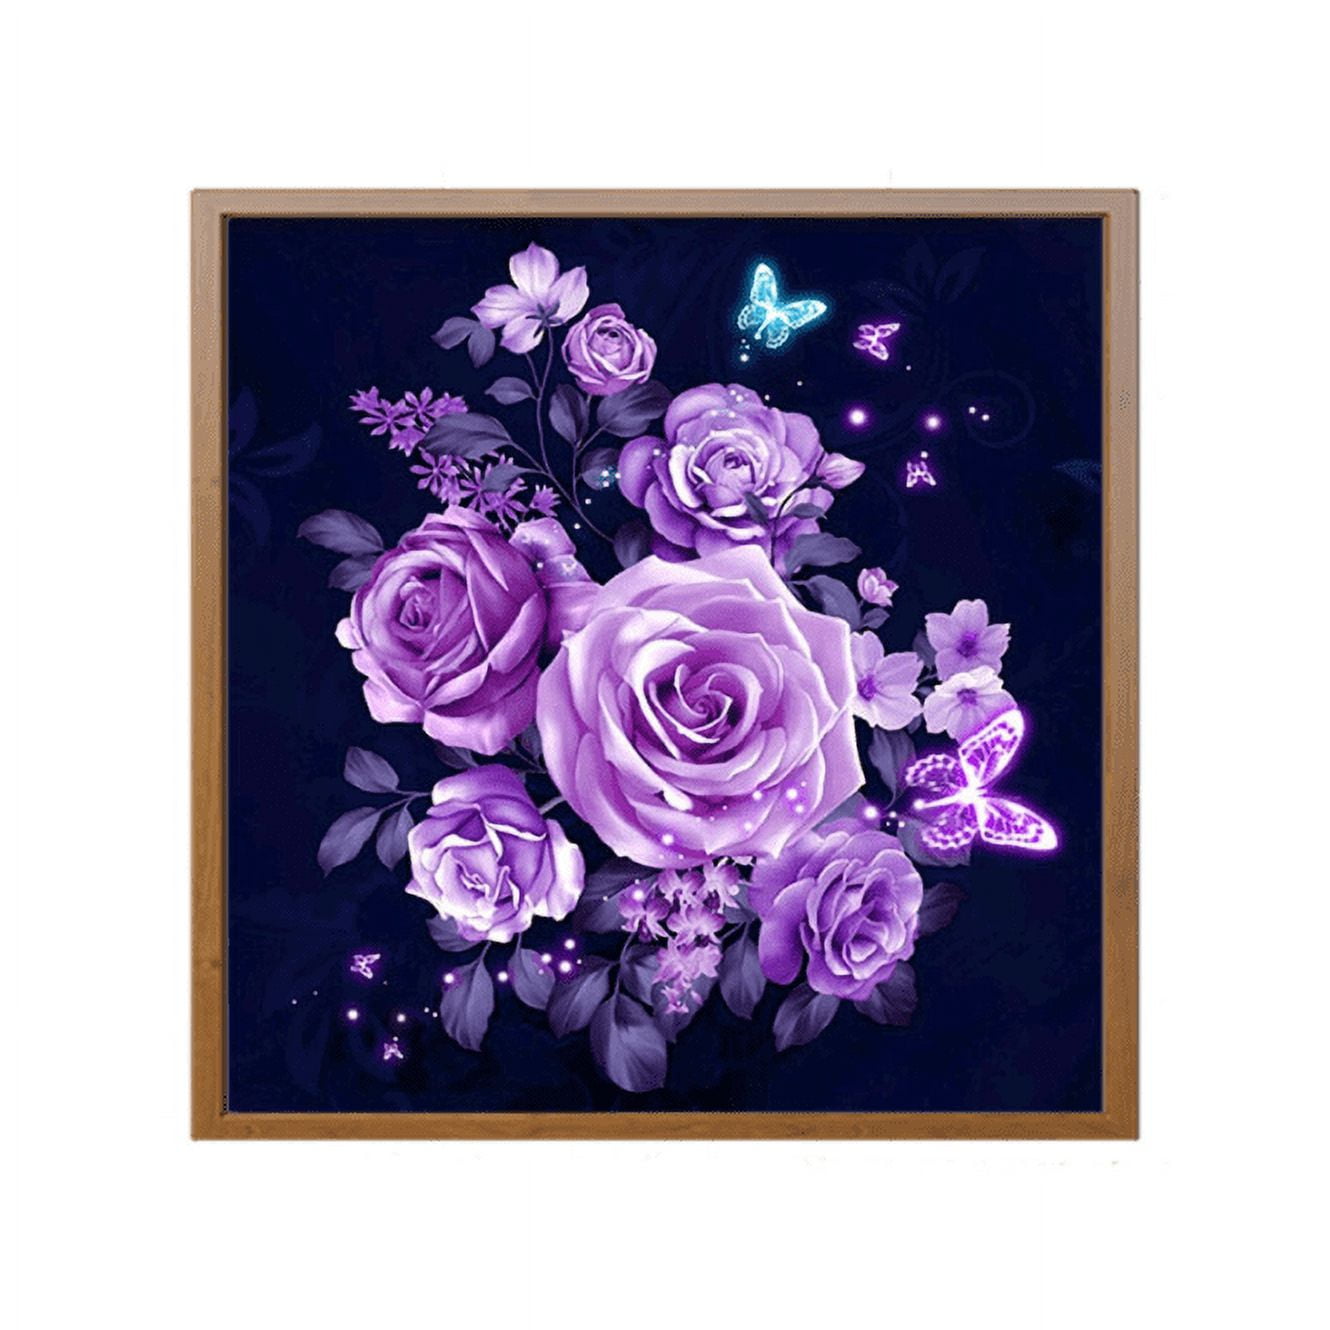 Fandela Diamond Painting Painting by Number Kits, Large Size, Solid Drill,  5D Diamond Painting White Deer Rose Rhinestone Crystal Cross Stitch  Embroidery Mosaic Art for Wall Decor Round Drill F2814, : 